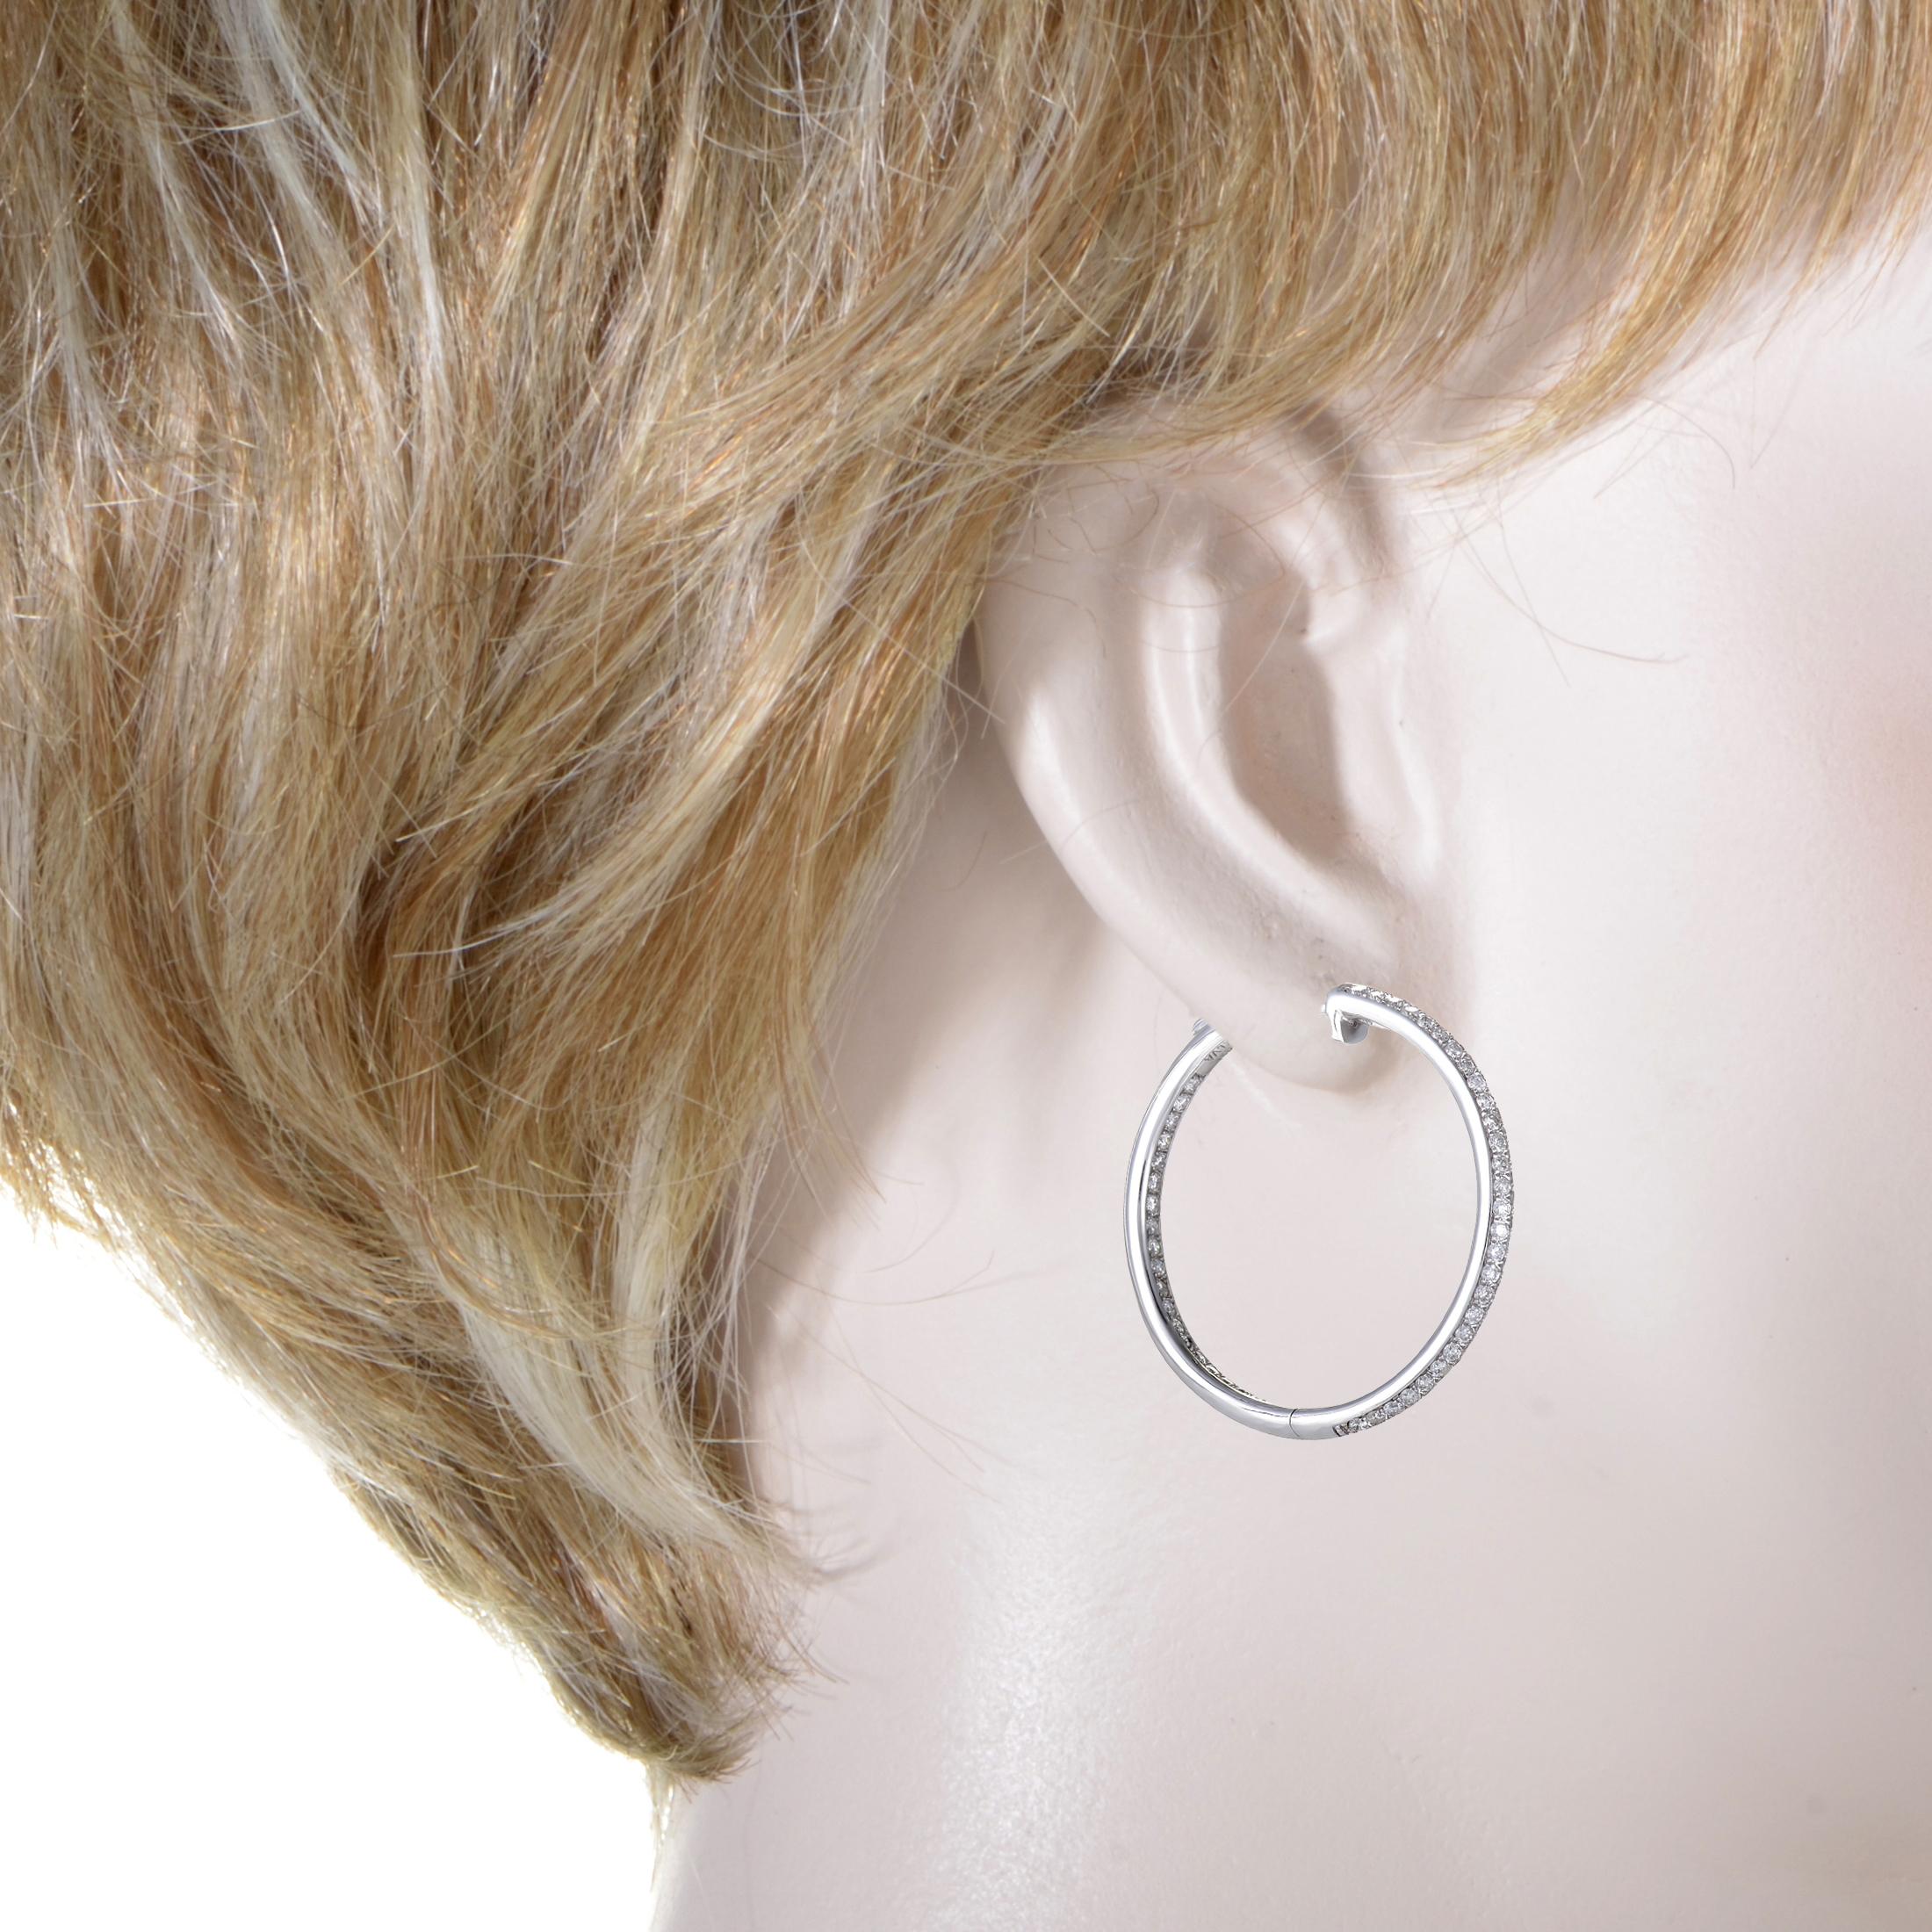 Incredibly stylish, these gorgeous hoop earrings are made of elegant 14K white gold and boast nifty refined appeal with a distinct luxurious feel to it added by the resplendent diamond stones that weigh 1.00 carat in total.
